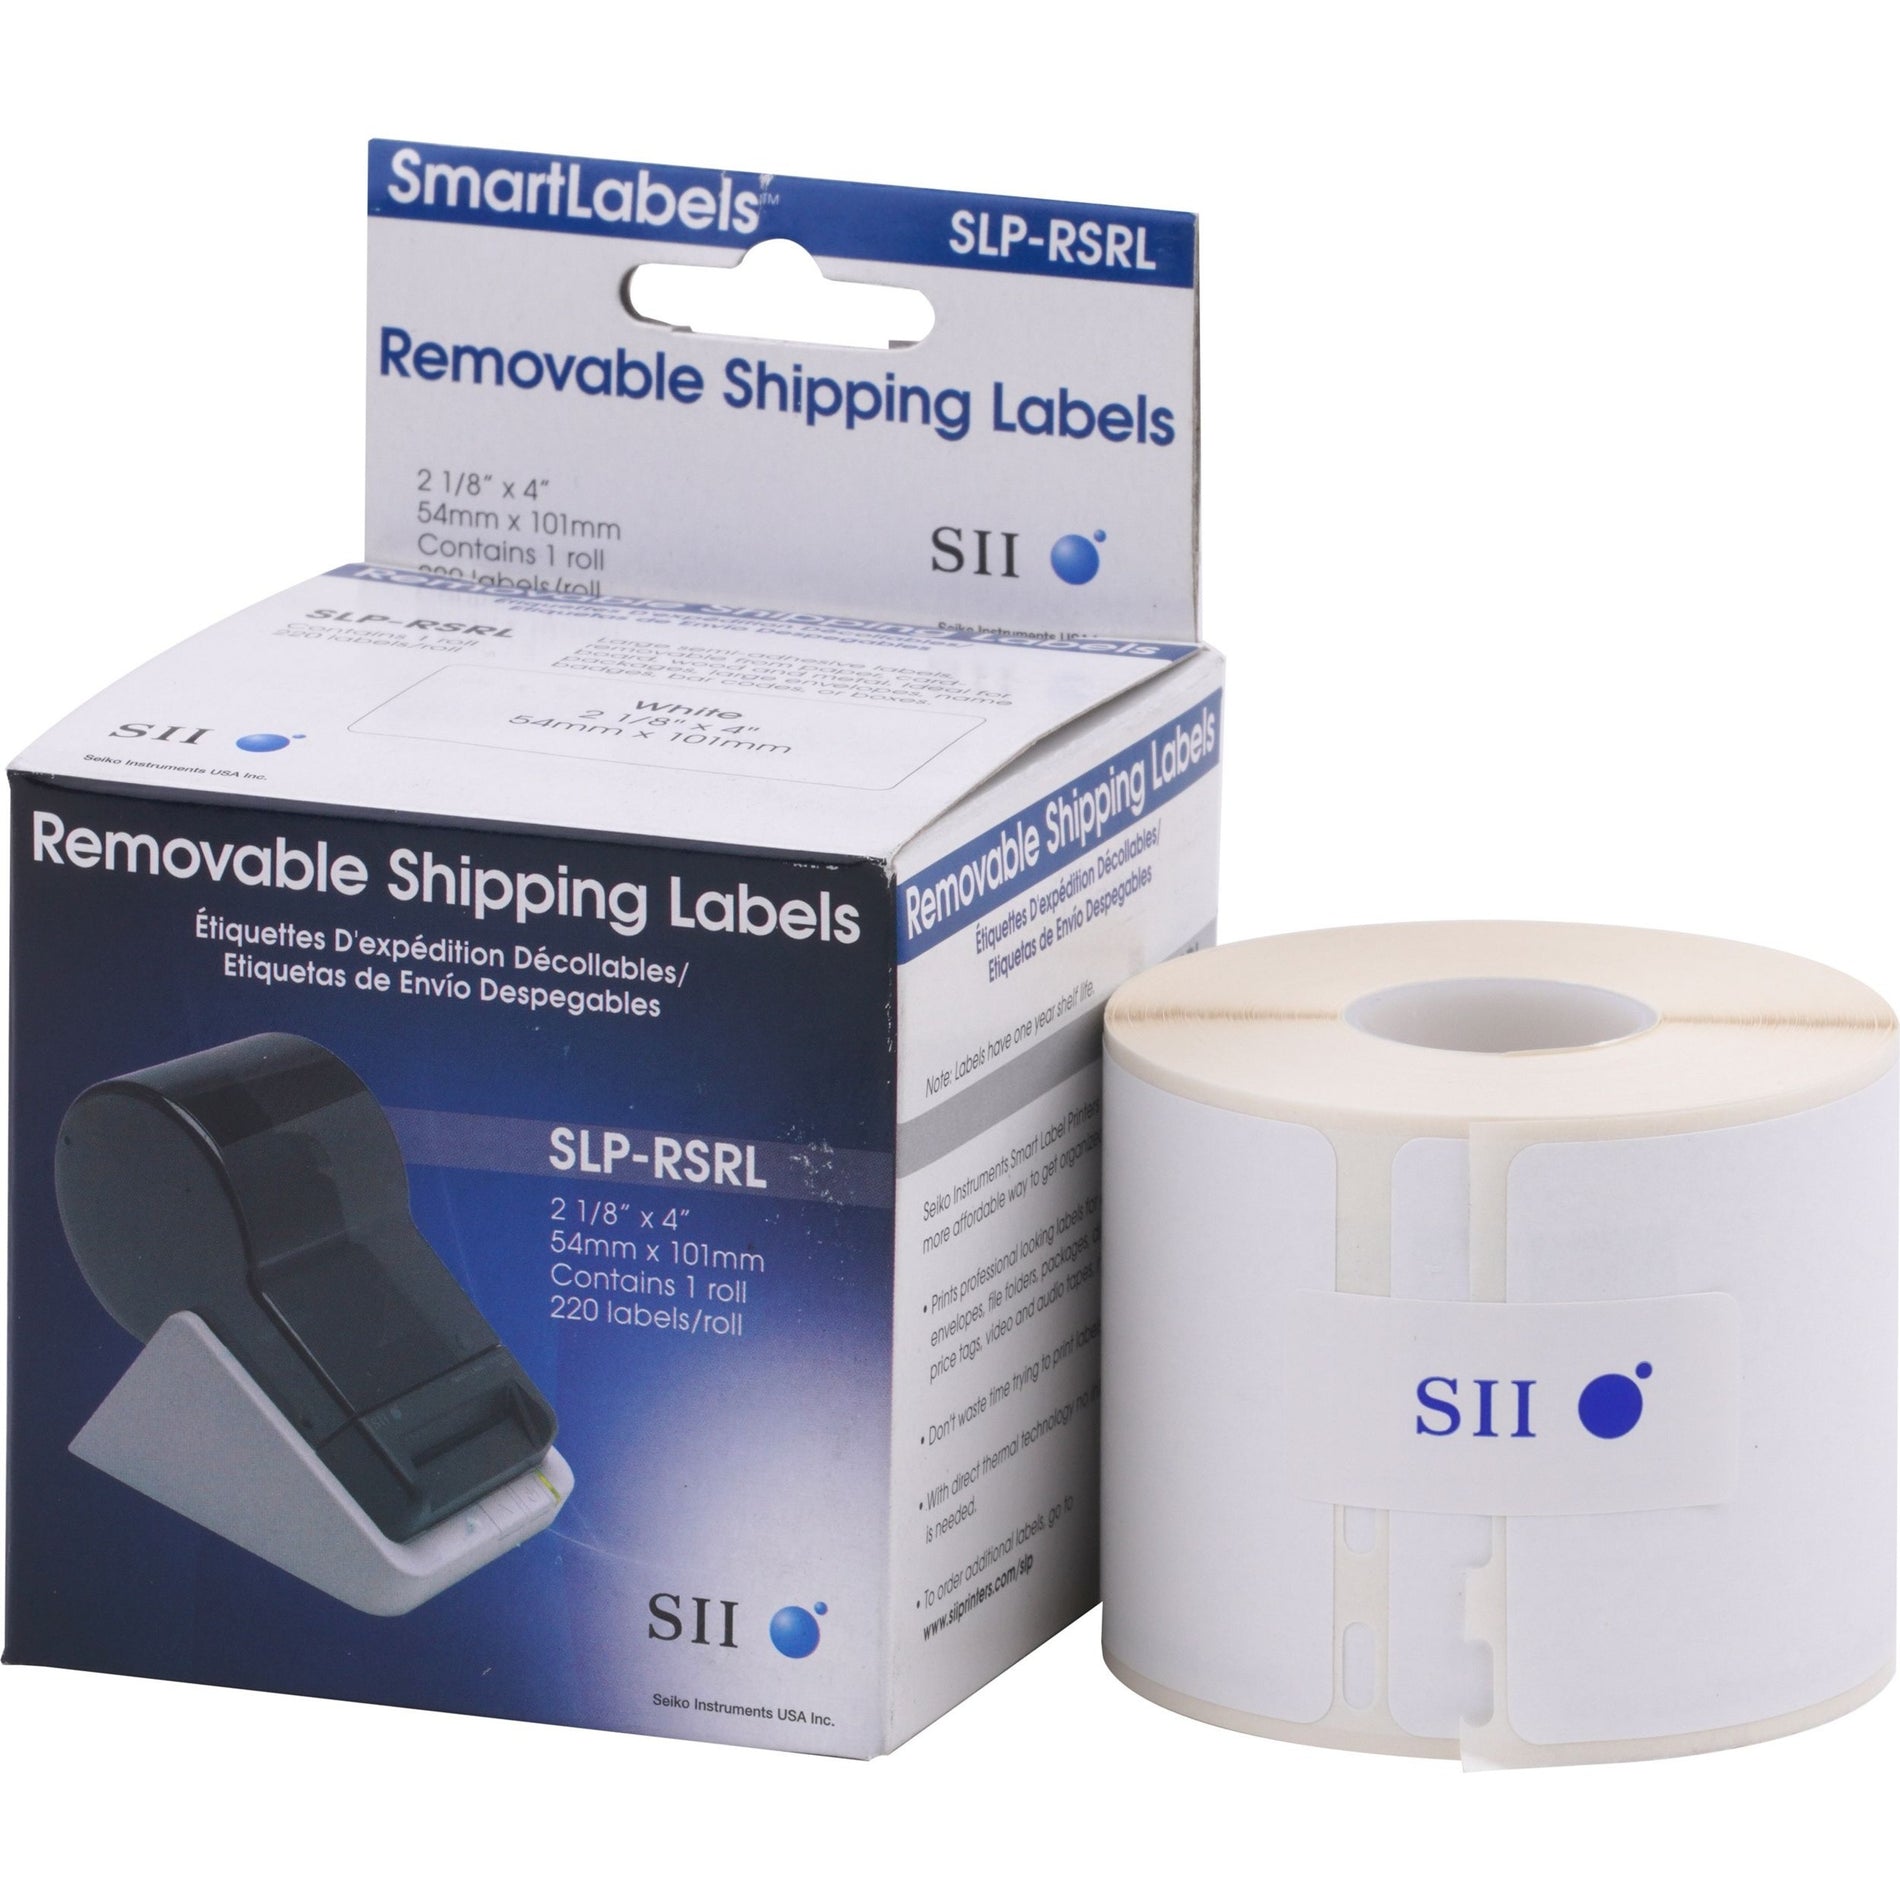 Seiko SLP-RSRL Shipping Labels, Removable, 3 31/32" x 2 1/8", 220 Labels